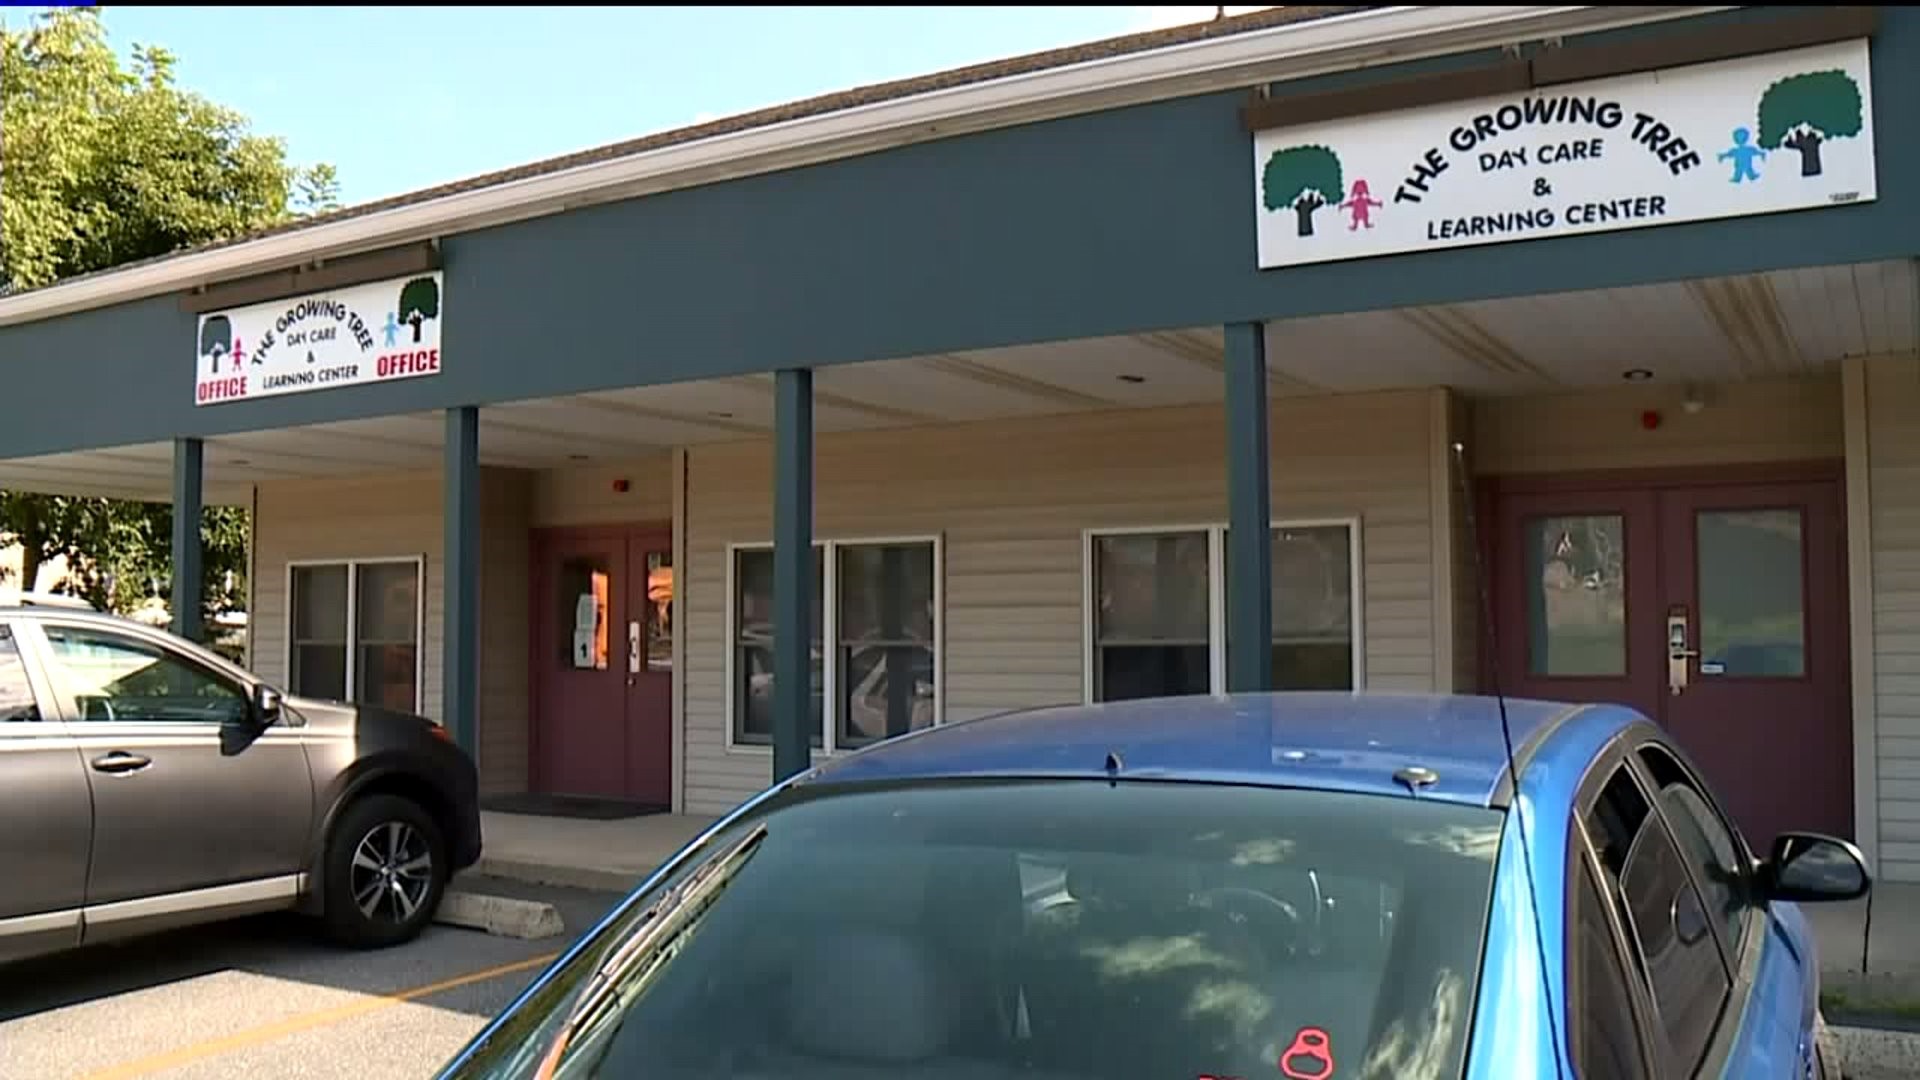 Day Care Centers Busy with Students as School Mold Issues Continue